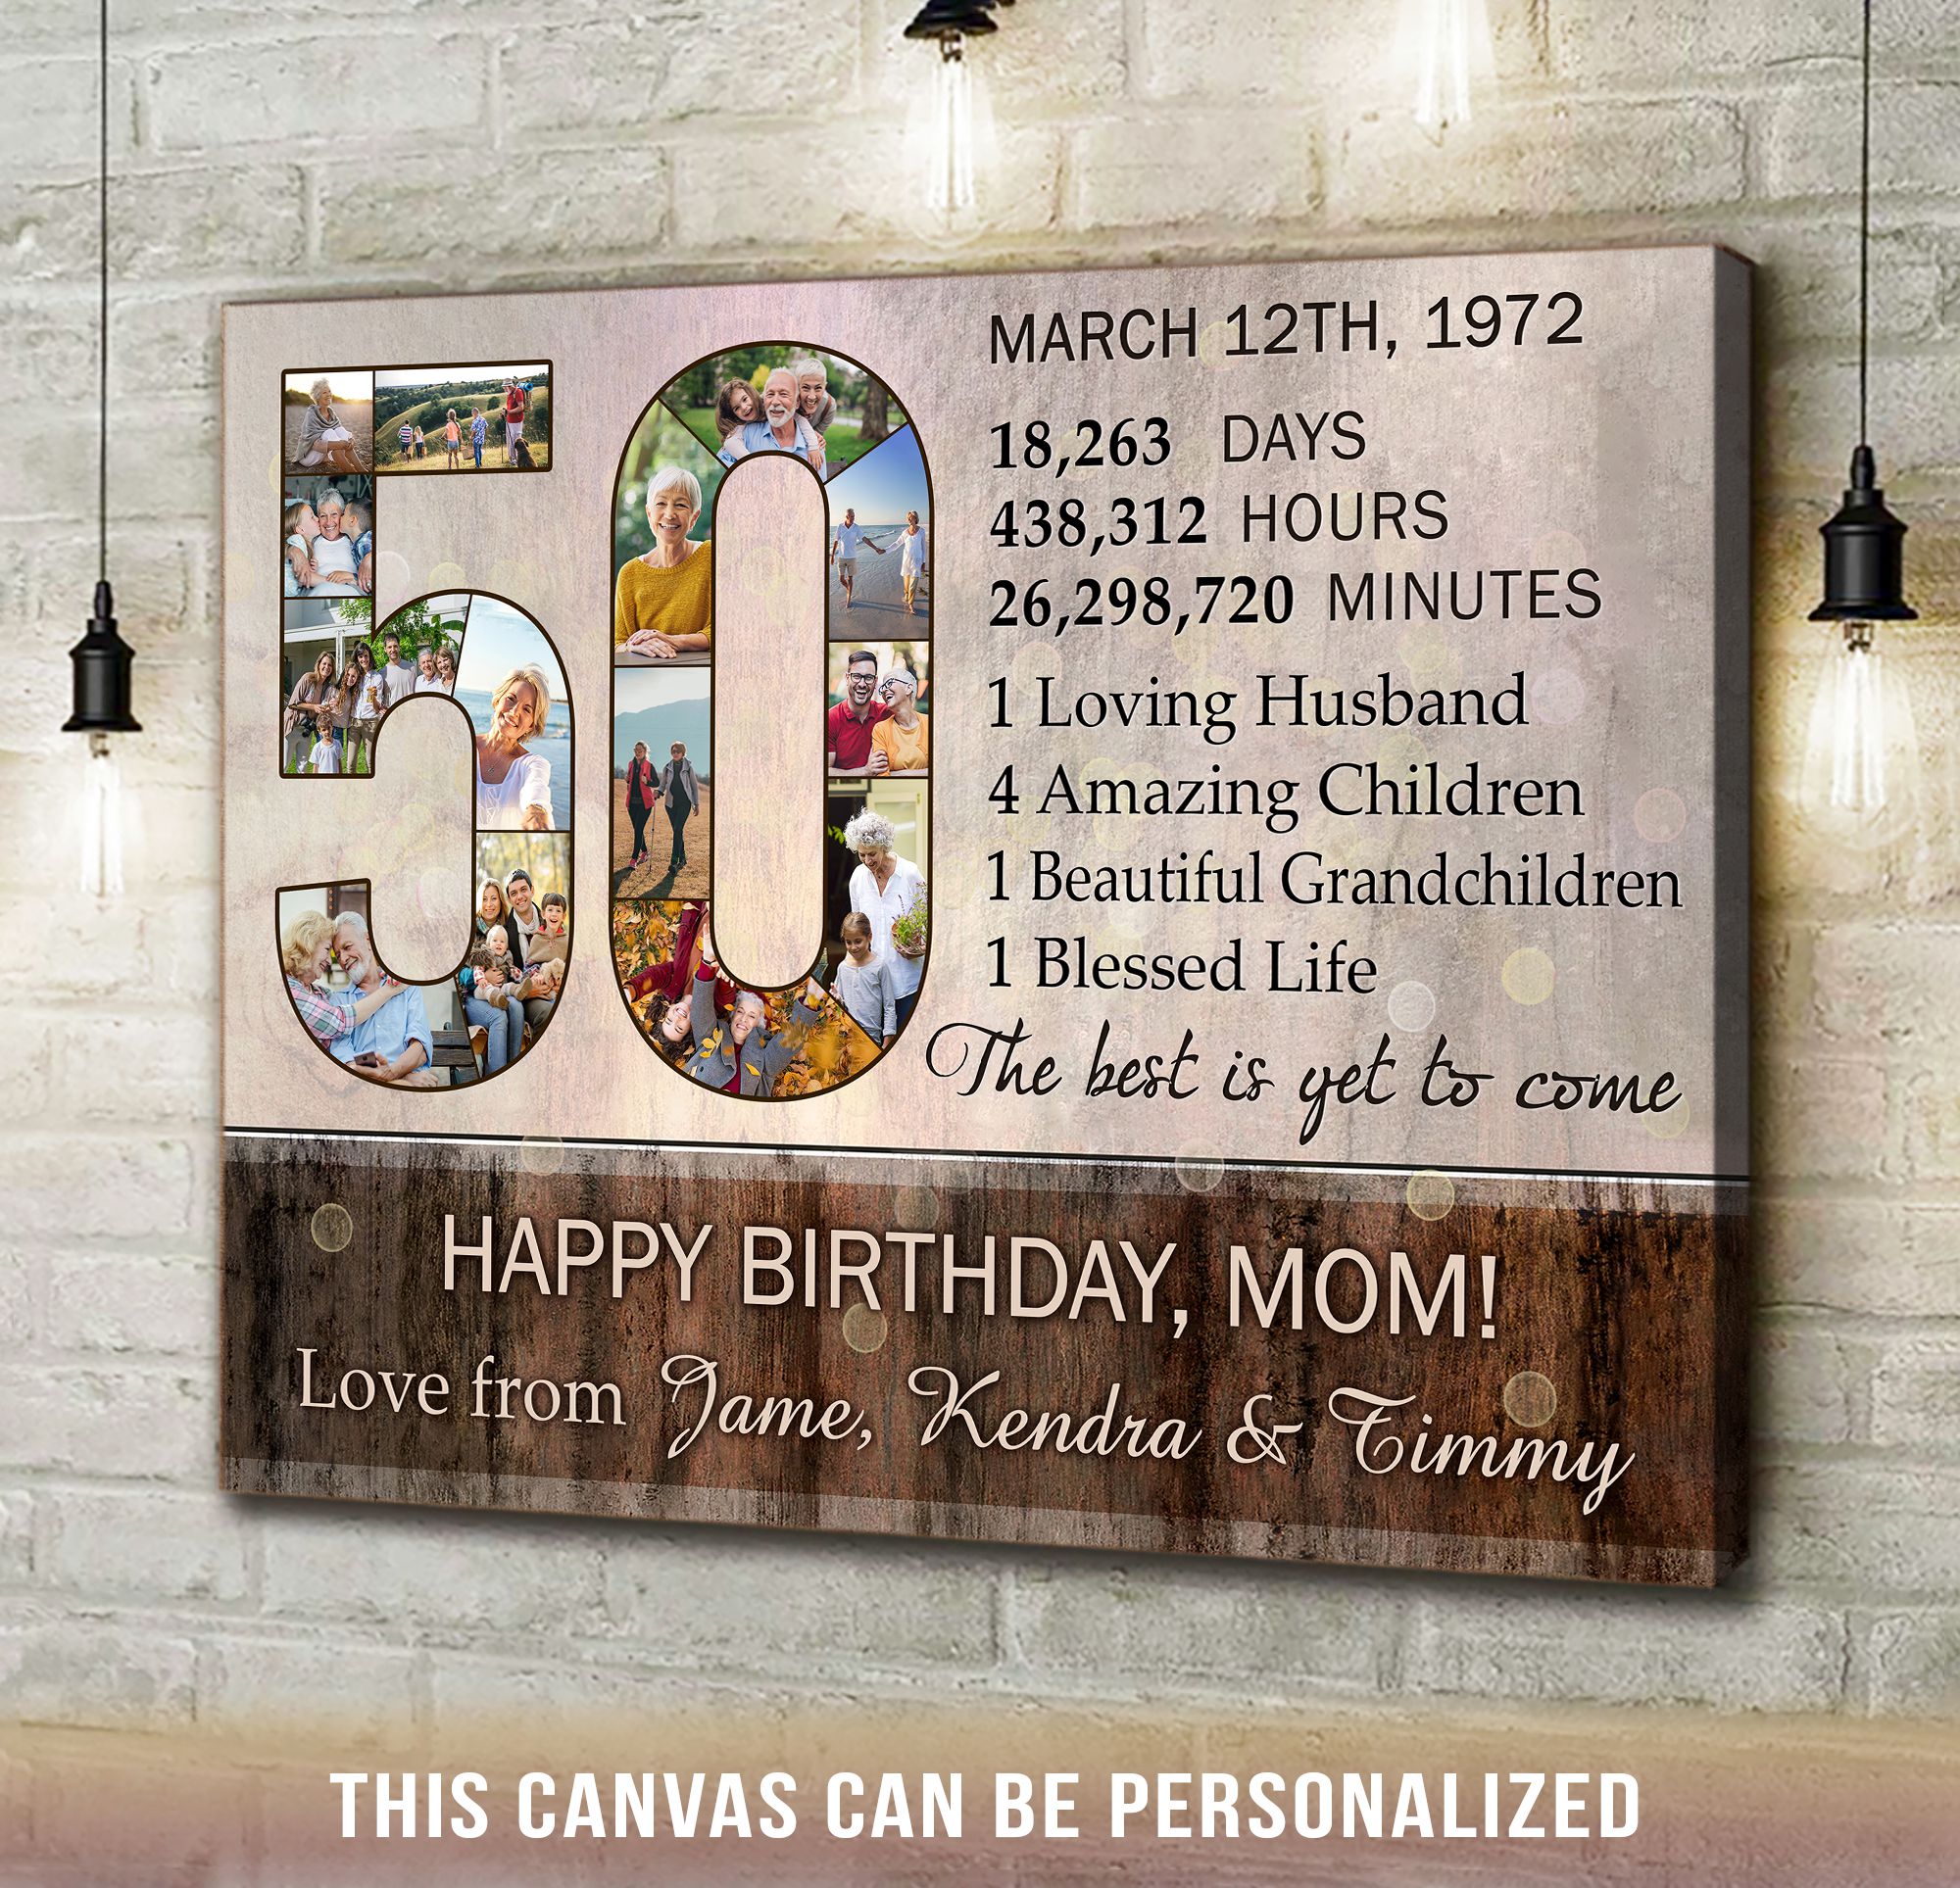 50th Birthday Gifts For Her